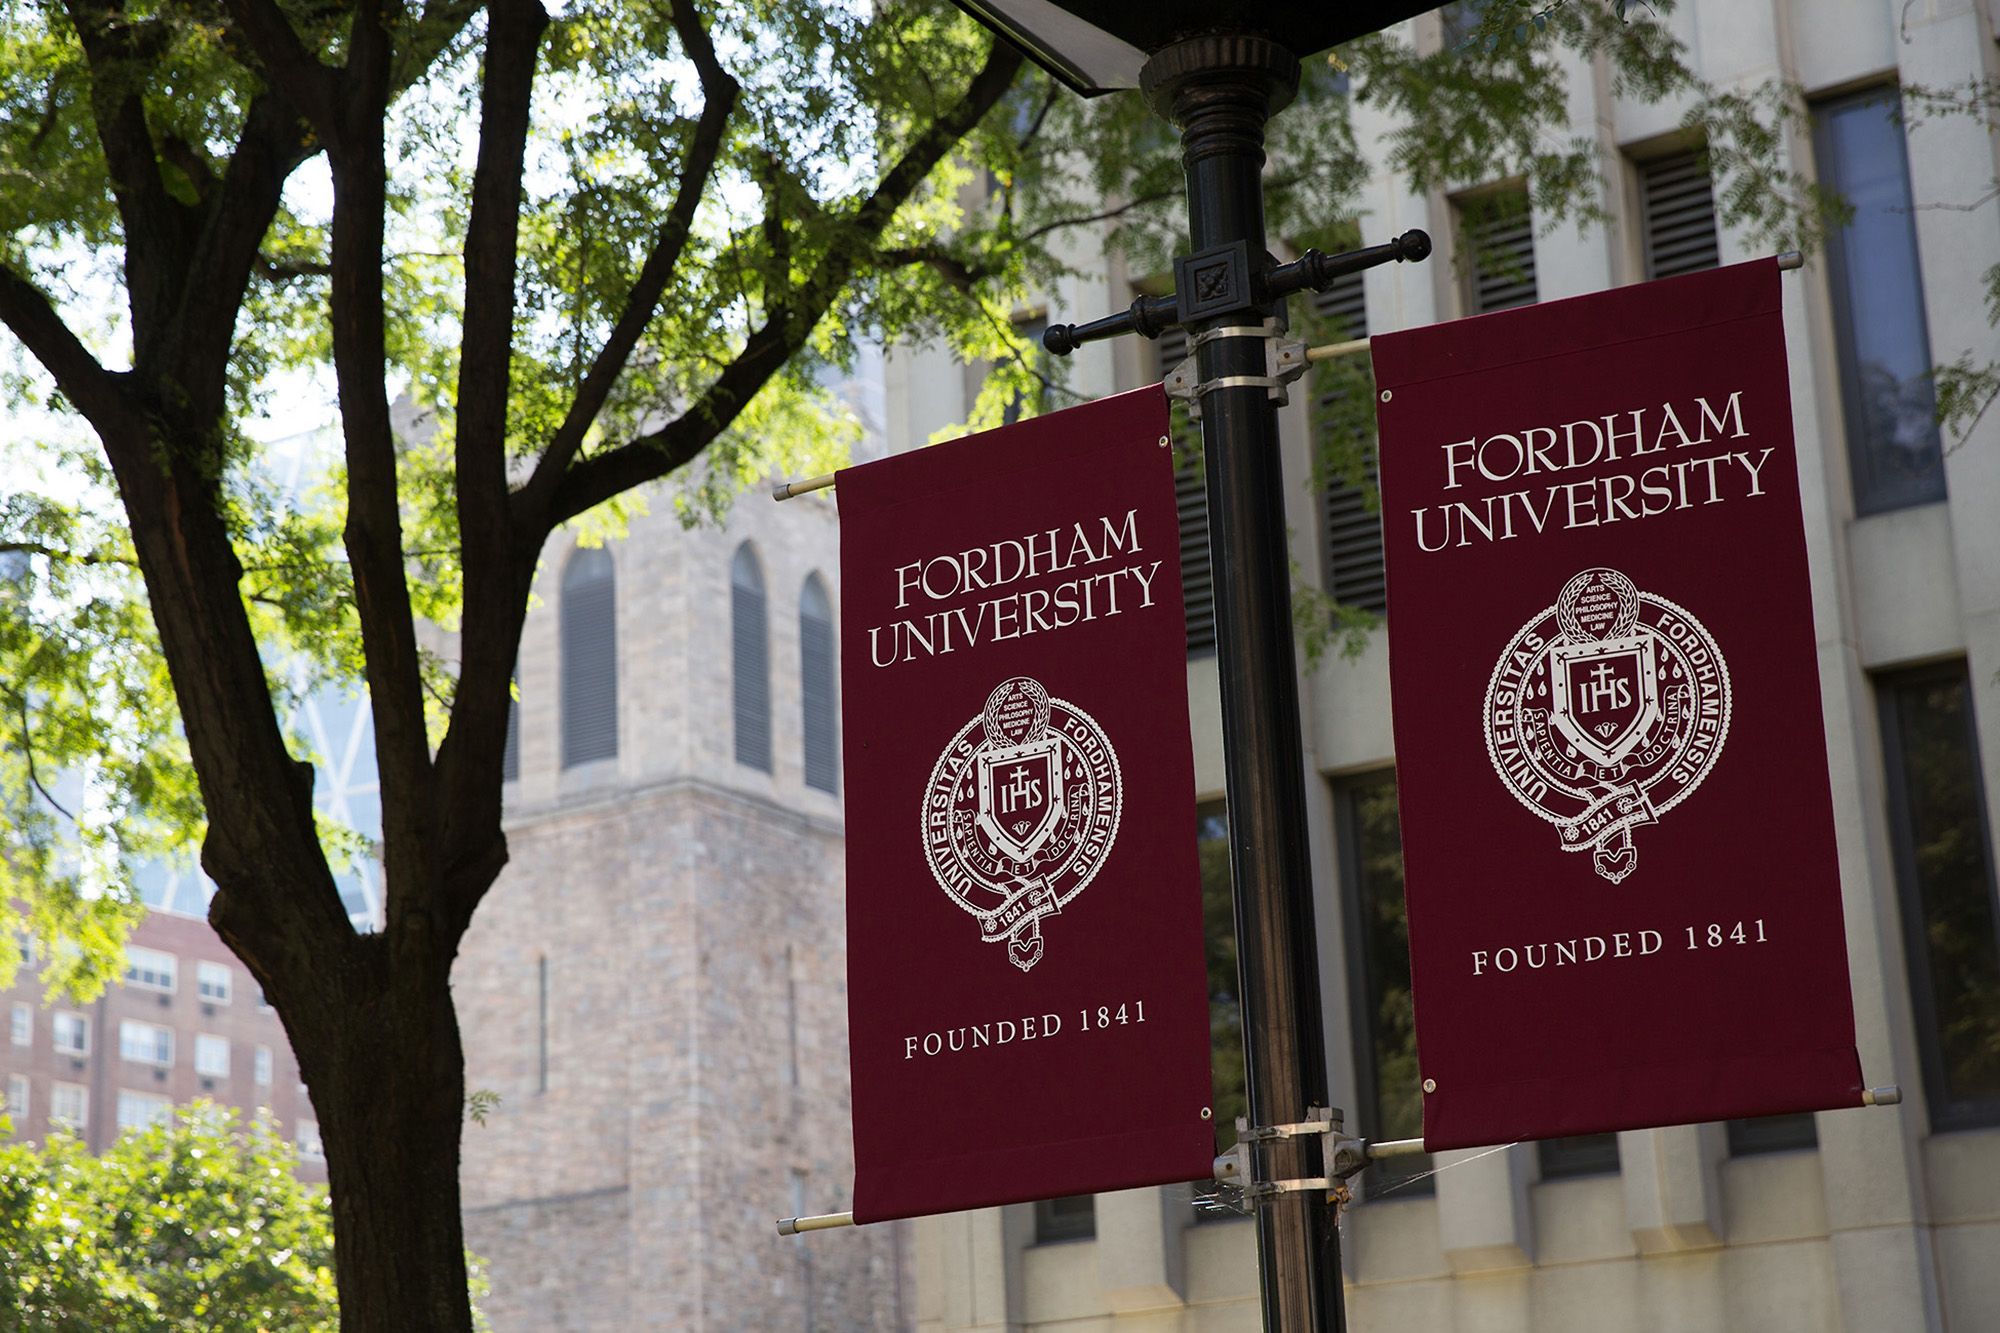 Image of Fordham flags with logo and Seal